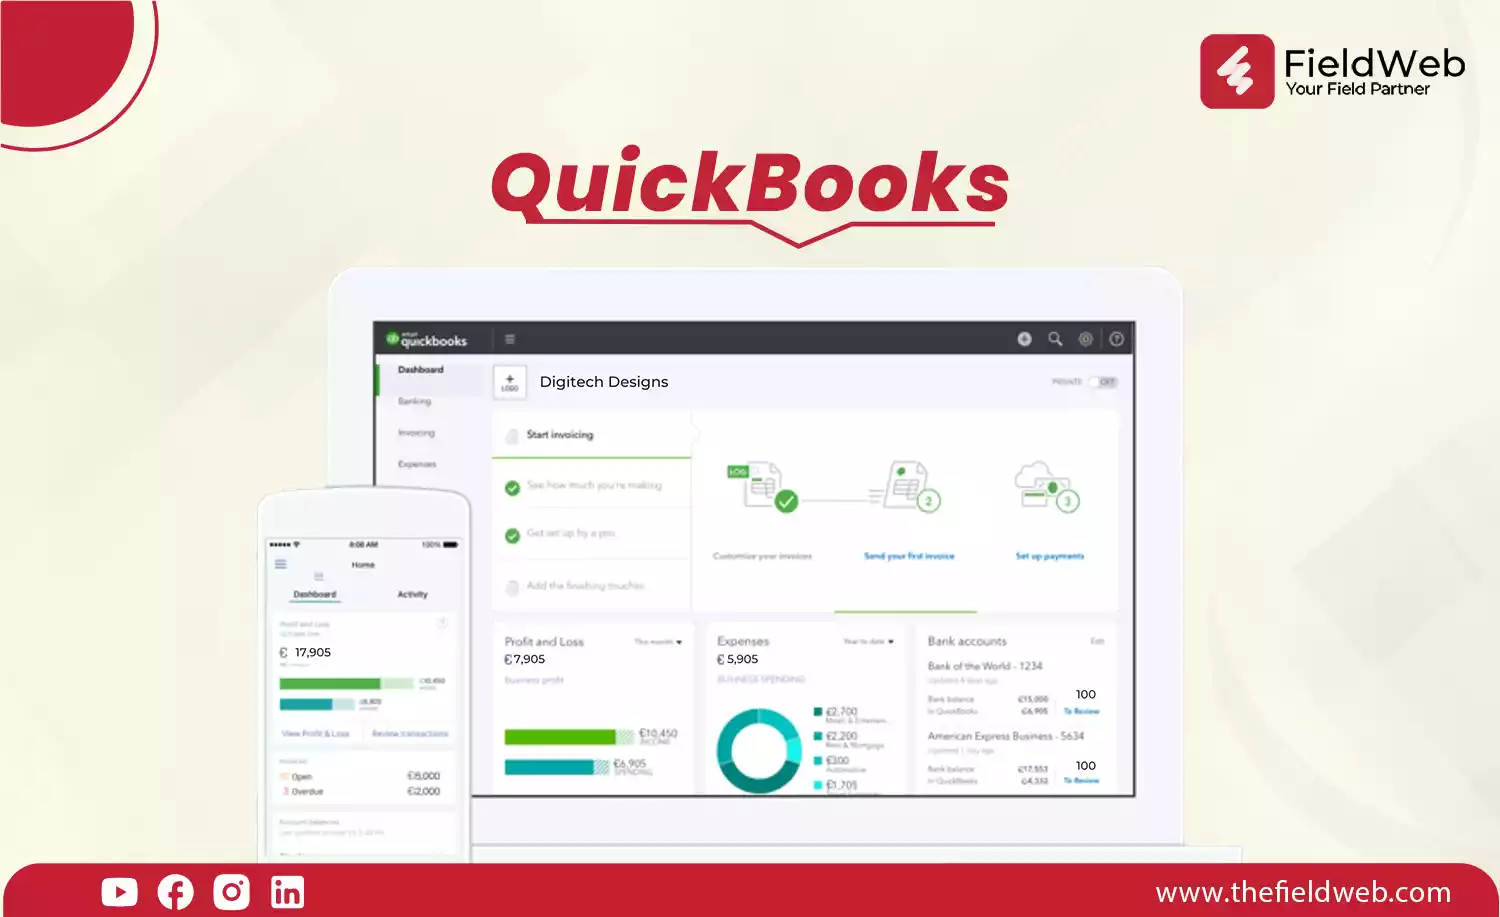 image is displaying the account management features of quickbooks